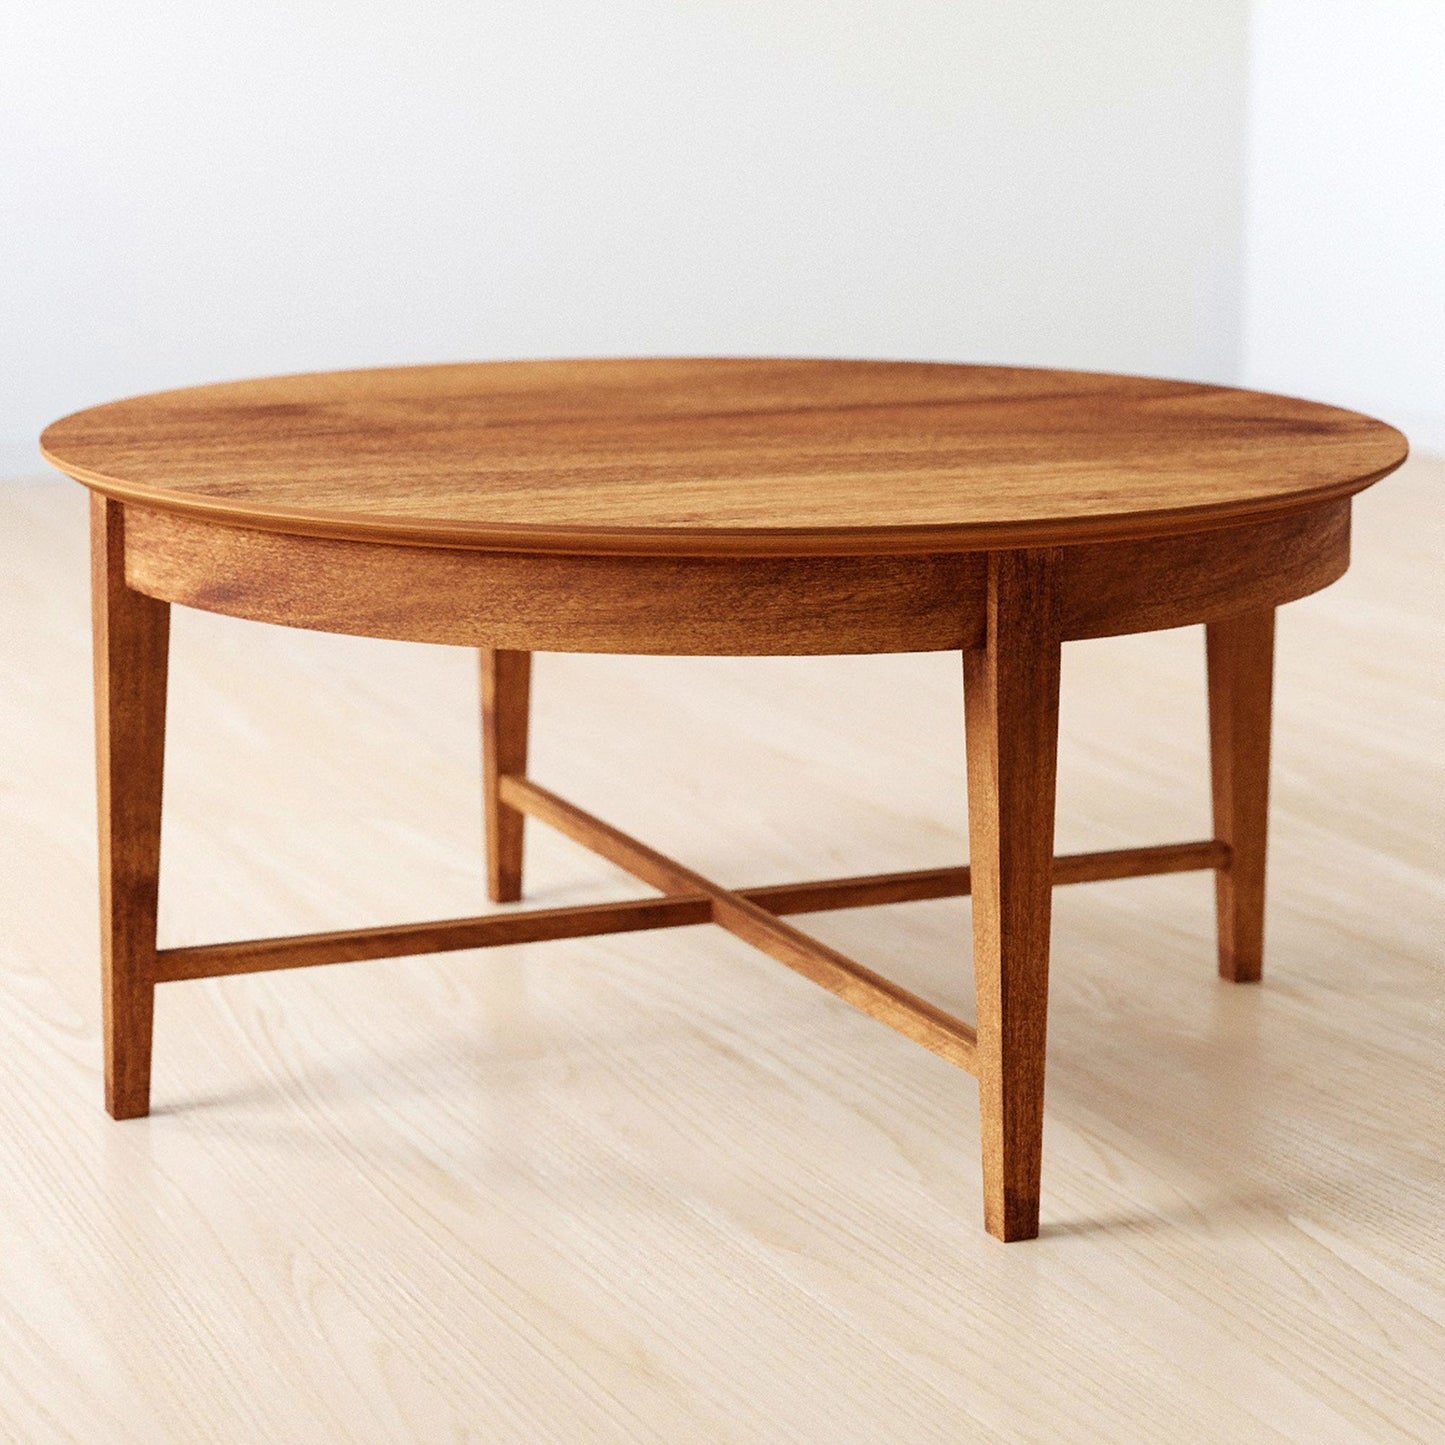 Gable Road Round Coffee Table